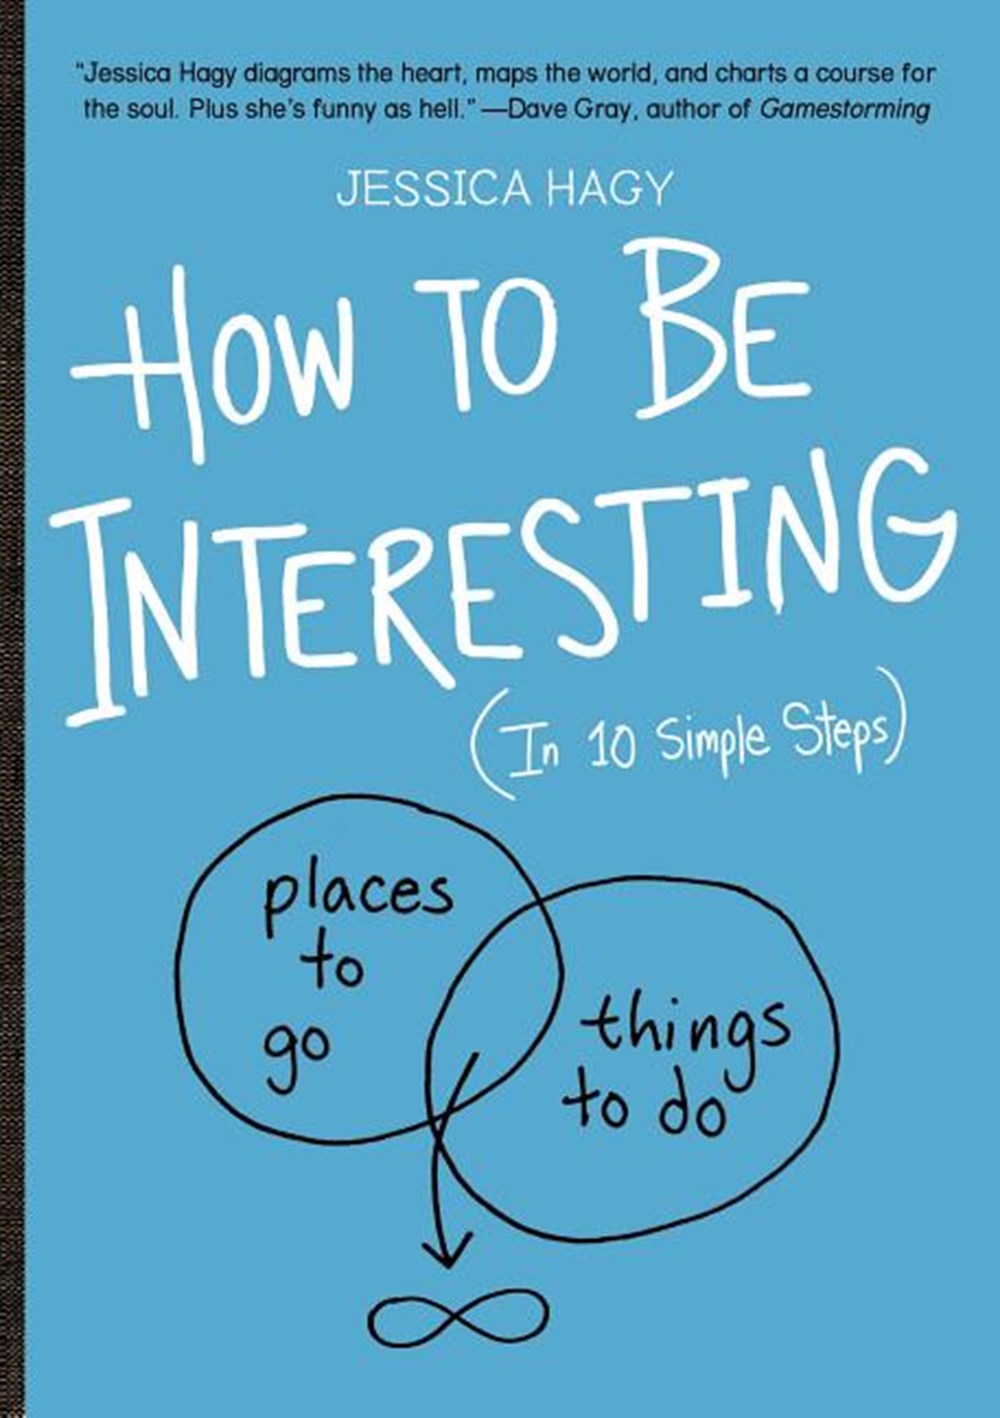 How to Be Interesting (in 10 Simple Steps)